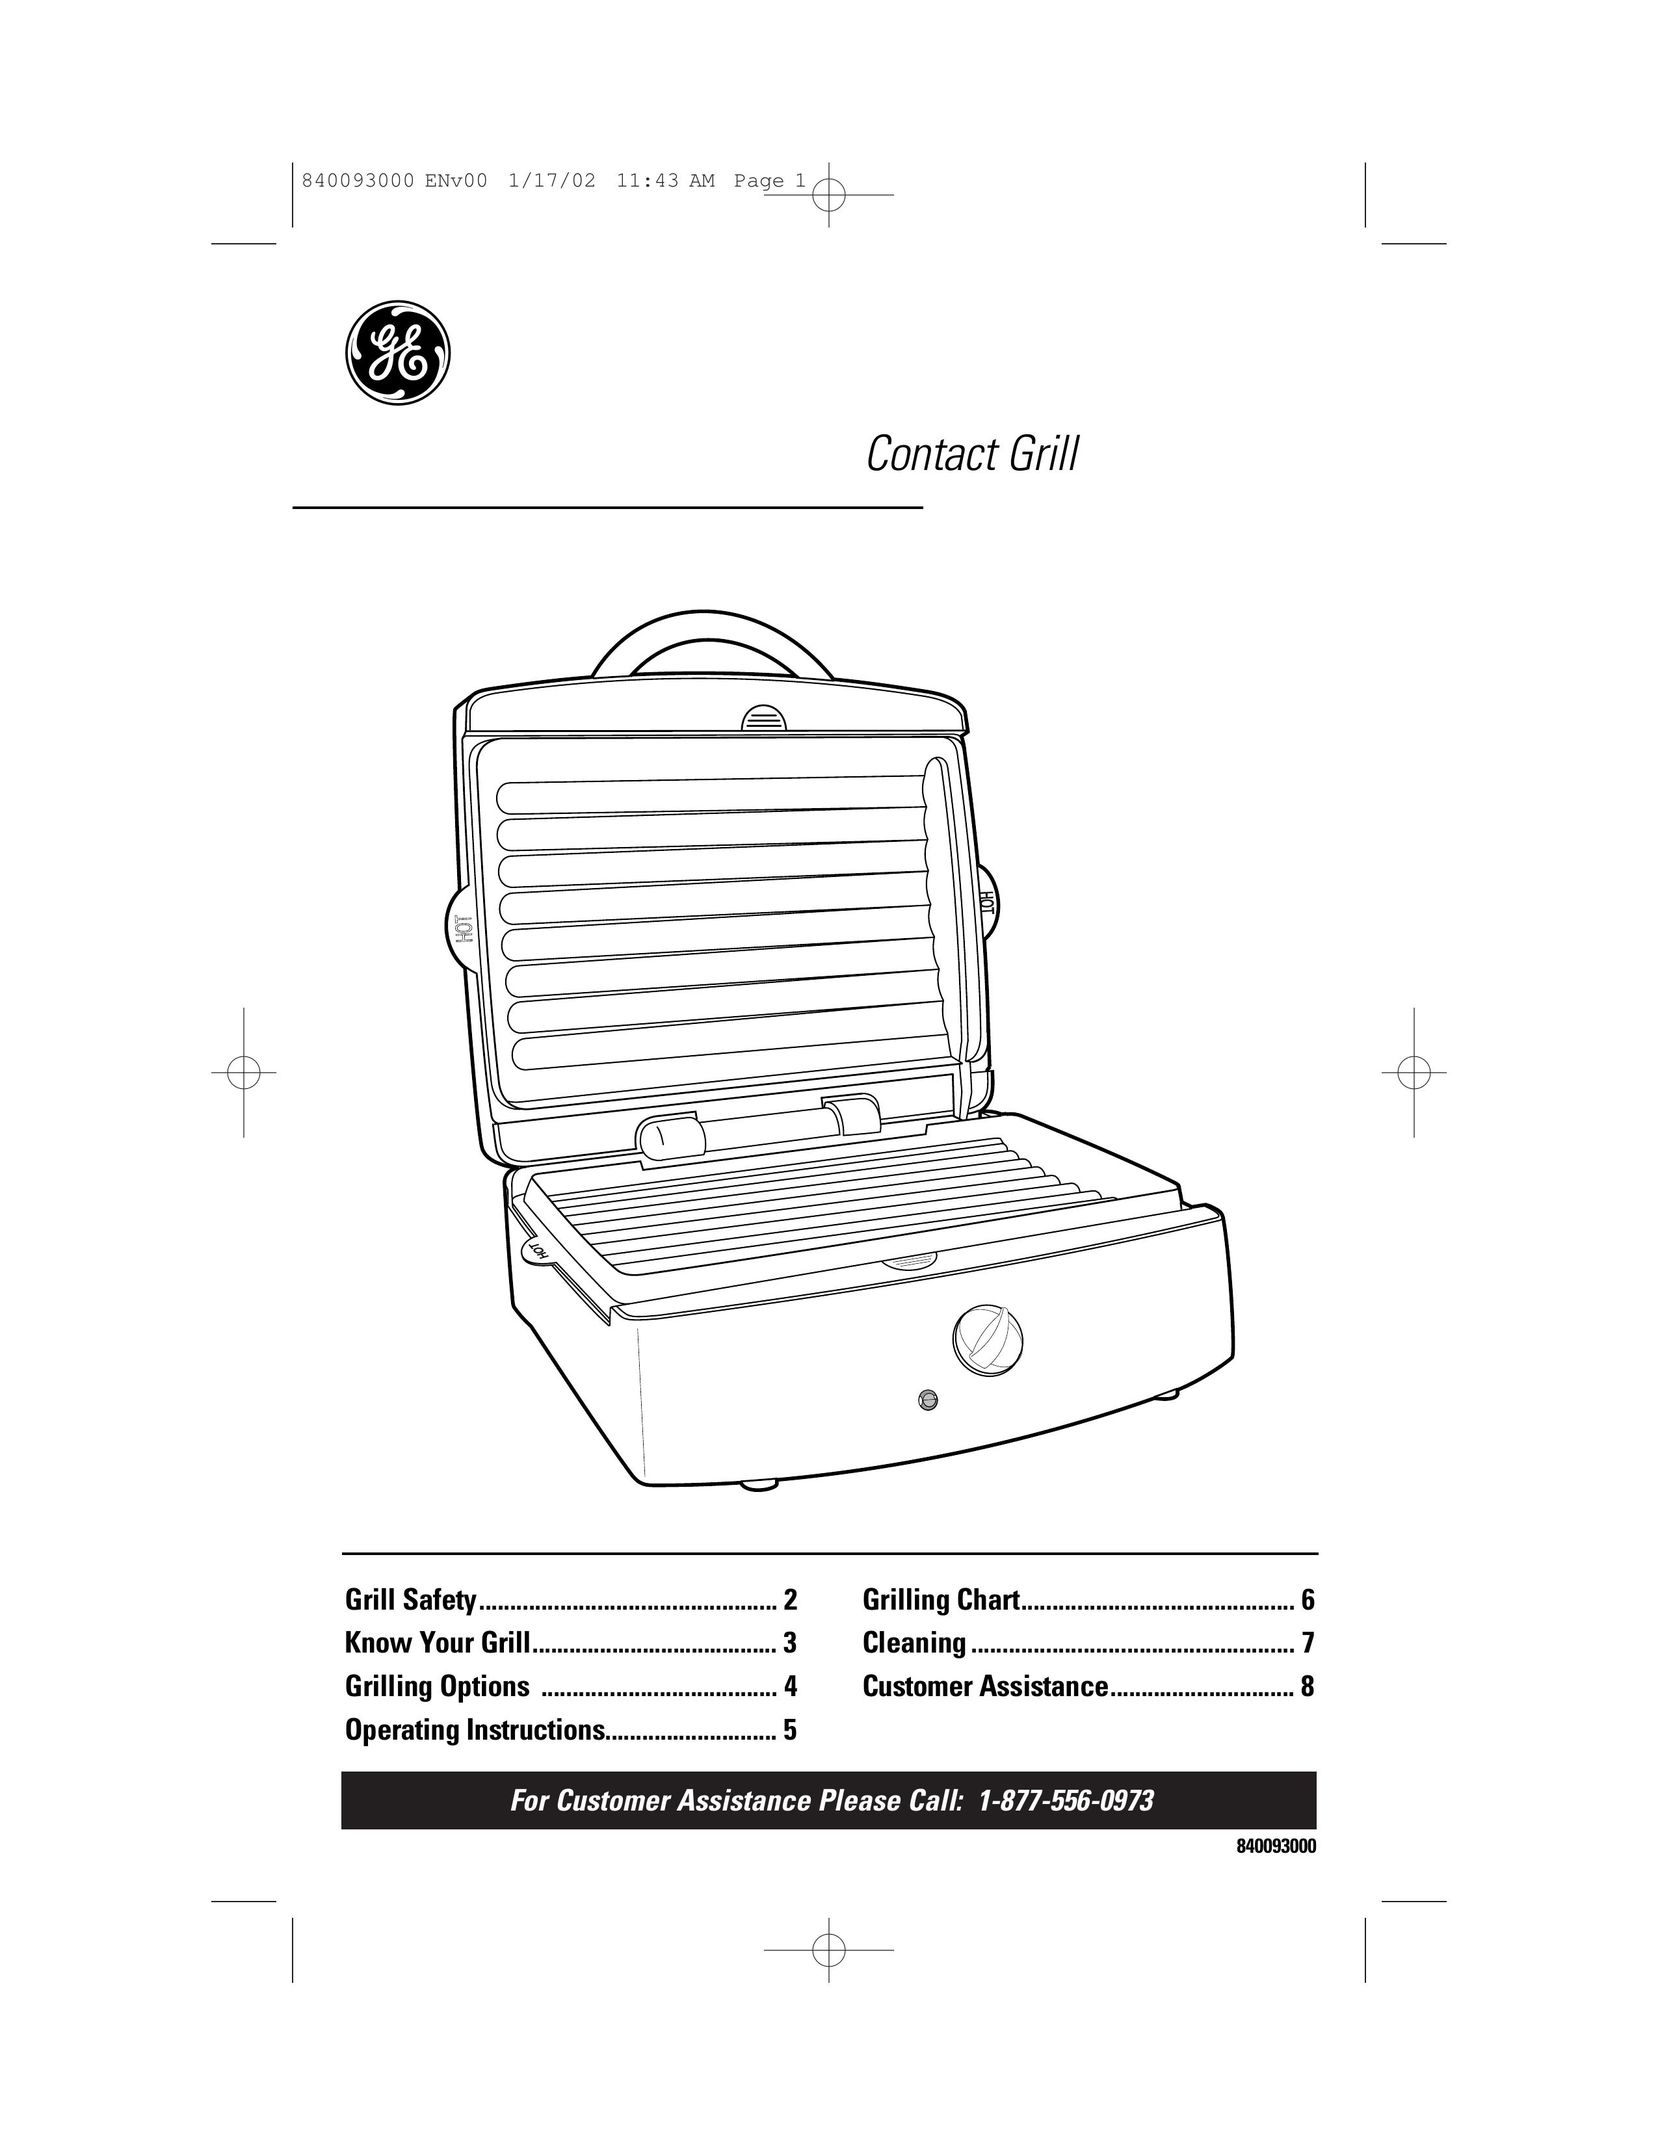 GE 169044 Kitchen Grill User Manual